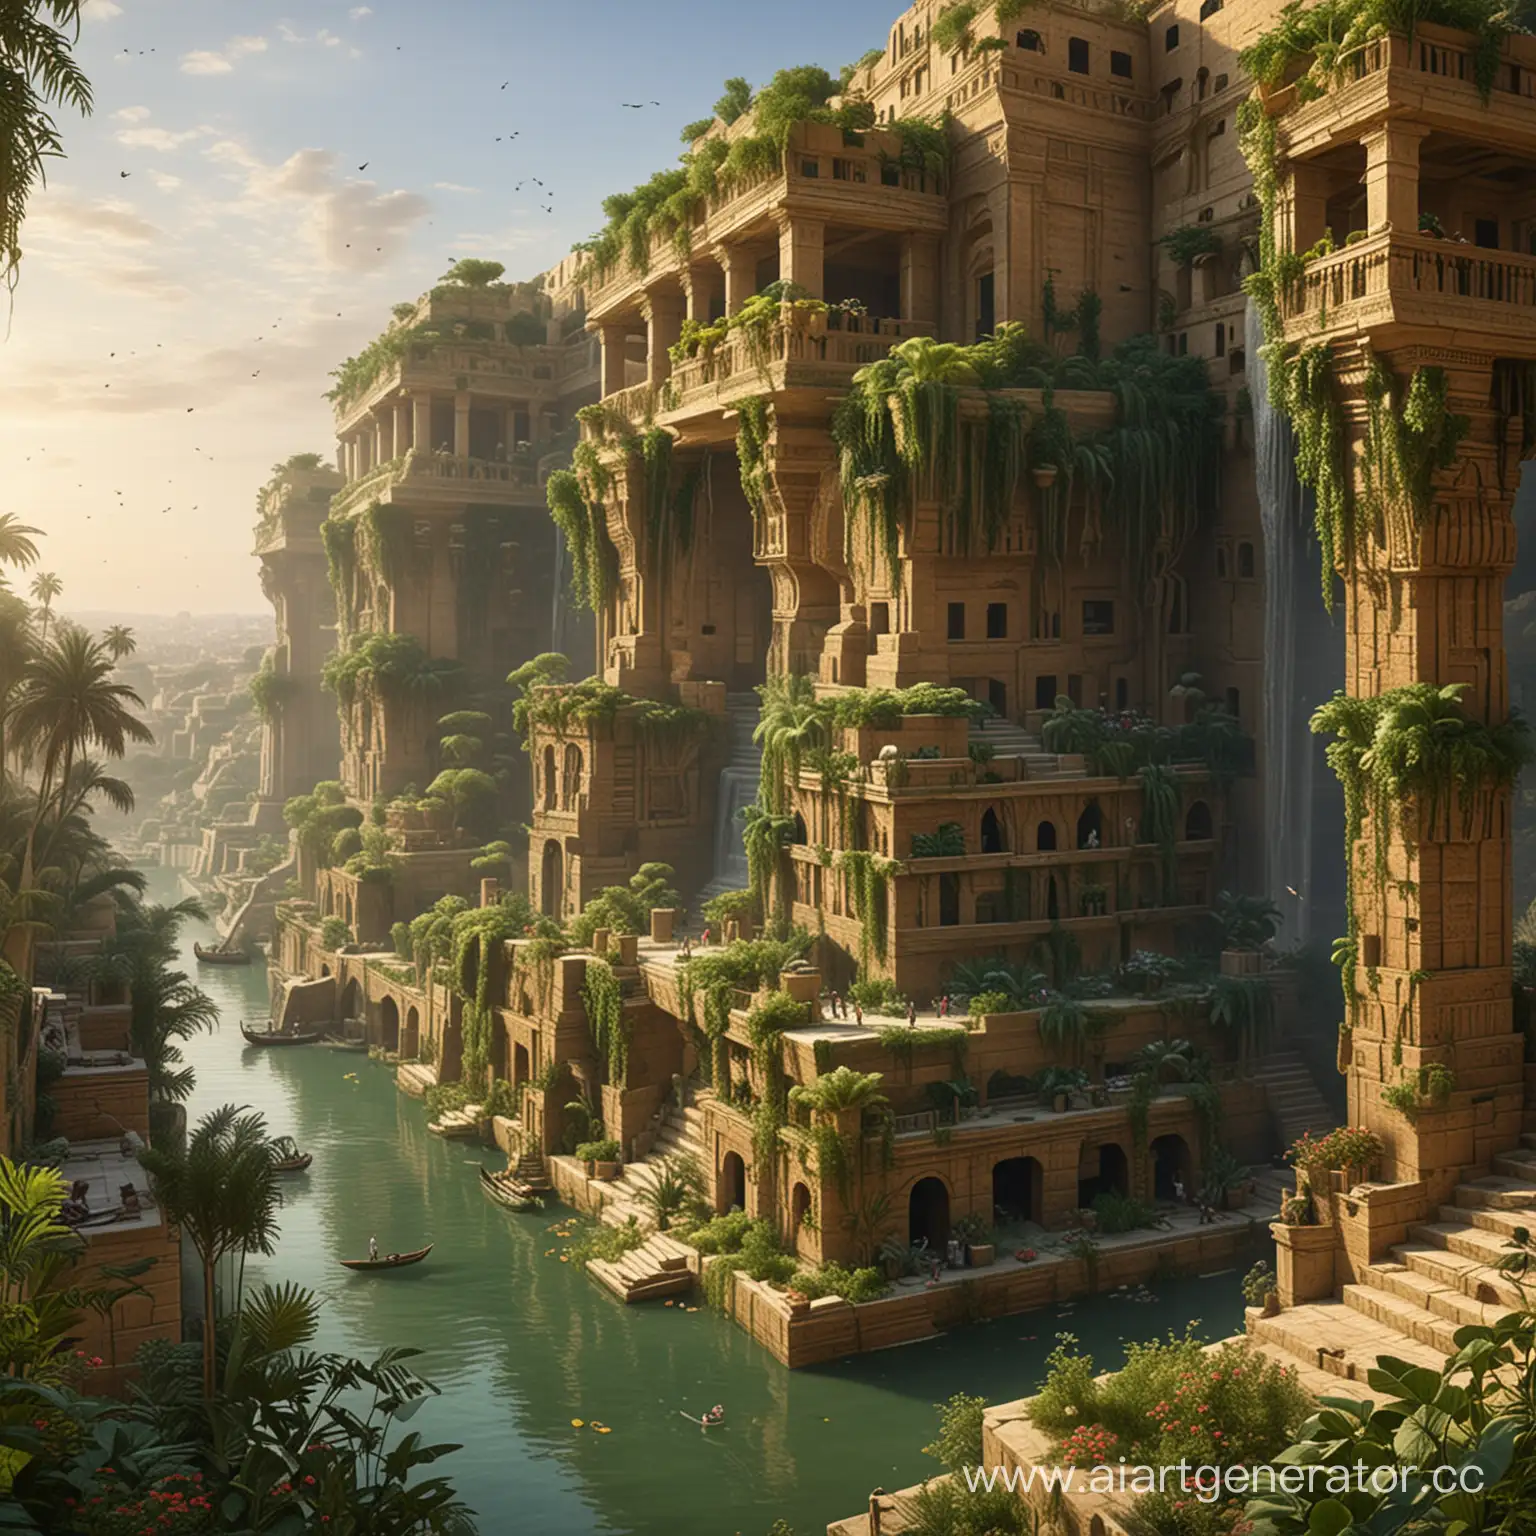 The Mysterious Beauty of the Hanging Gardens of Babylon
